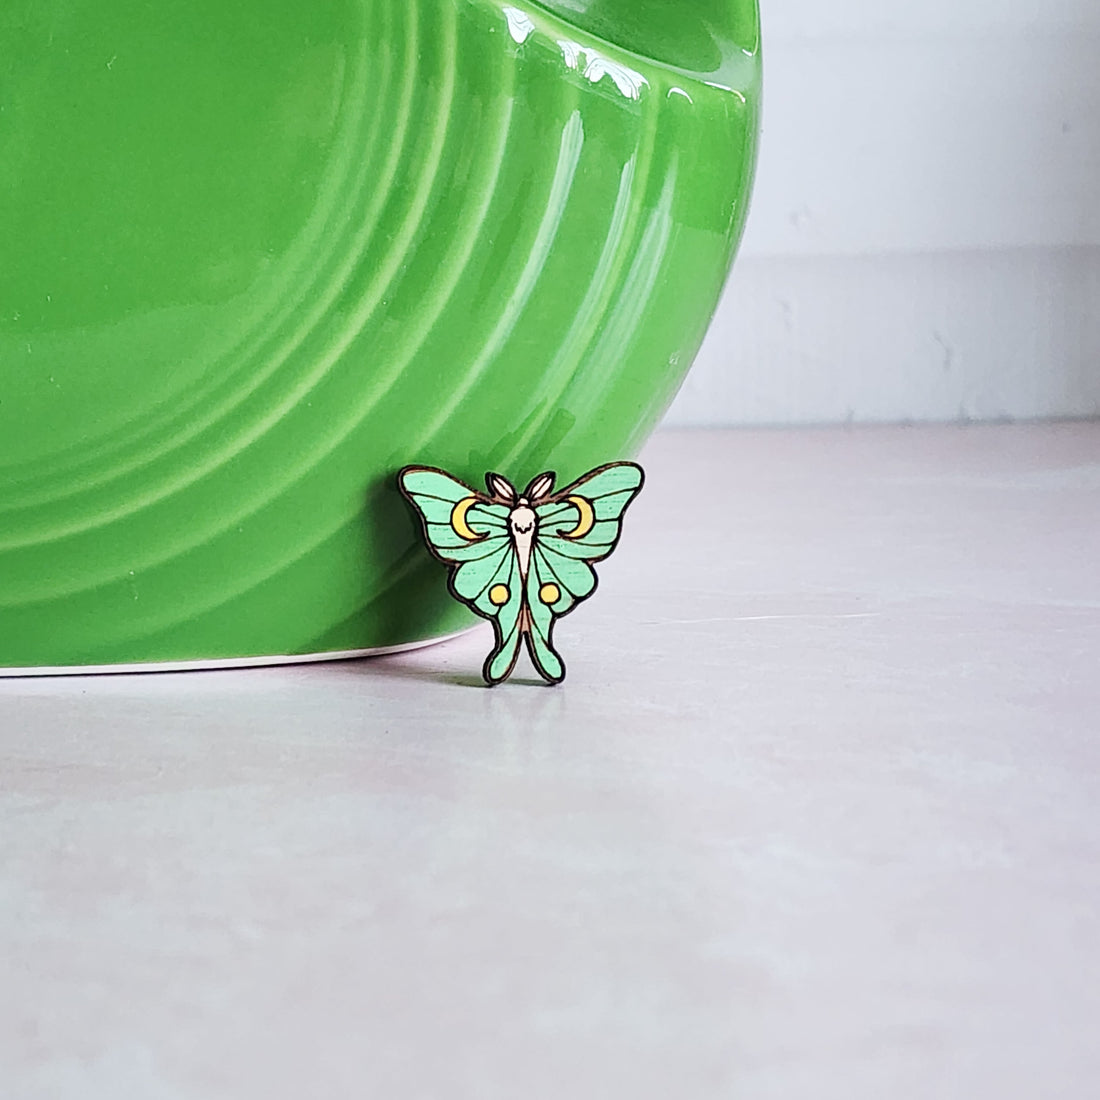 green luna moth pin with moons on the wings in front of a green vase